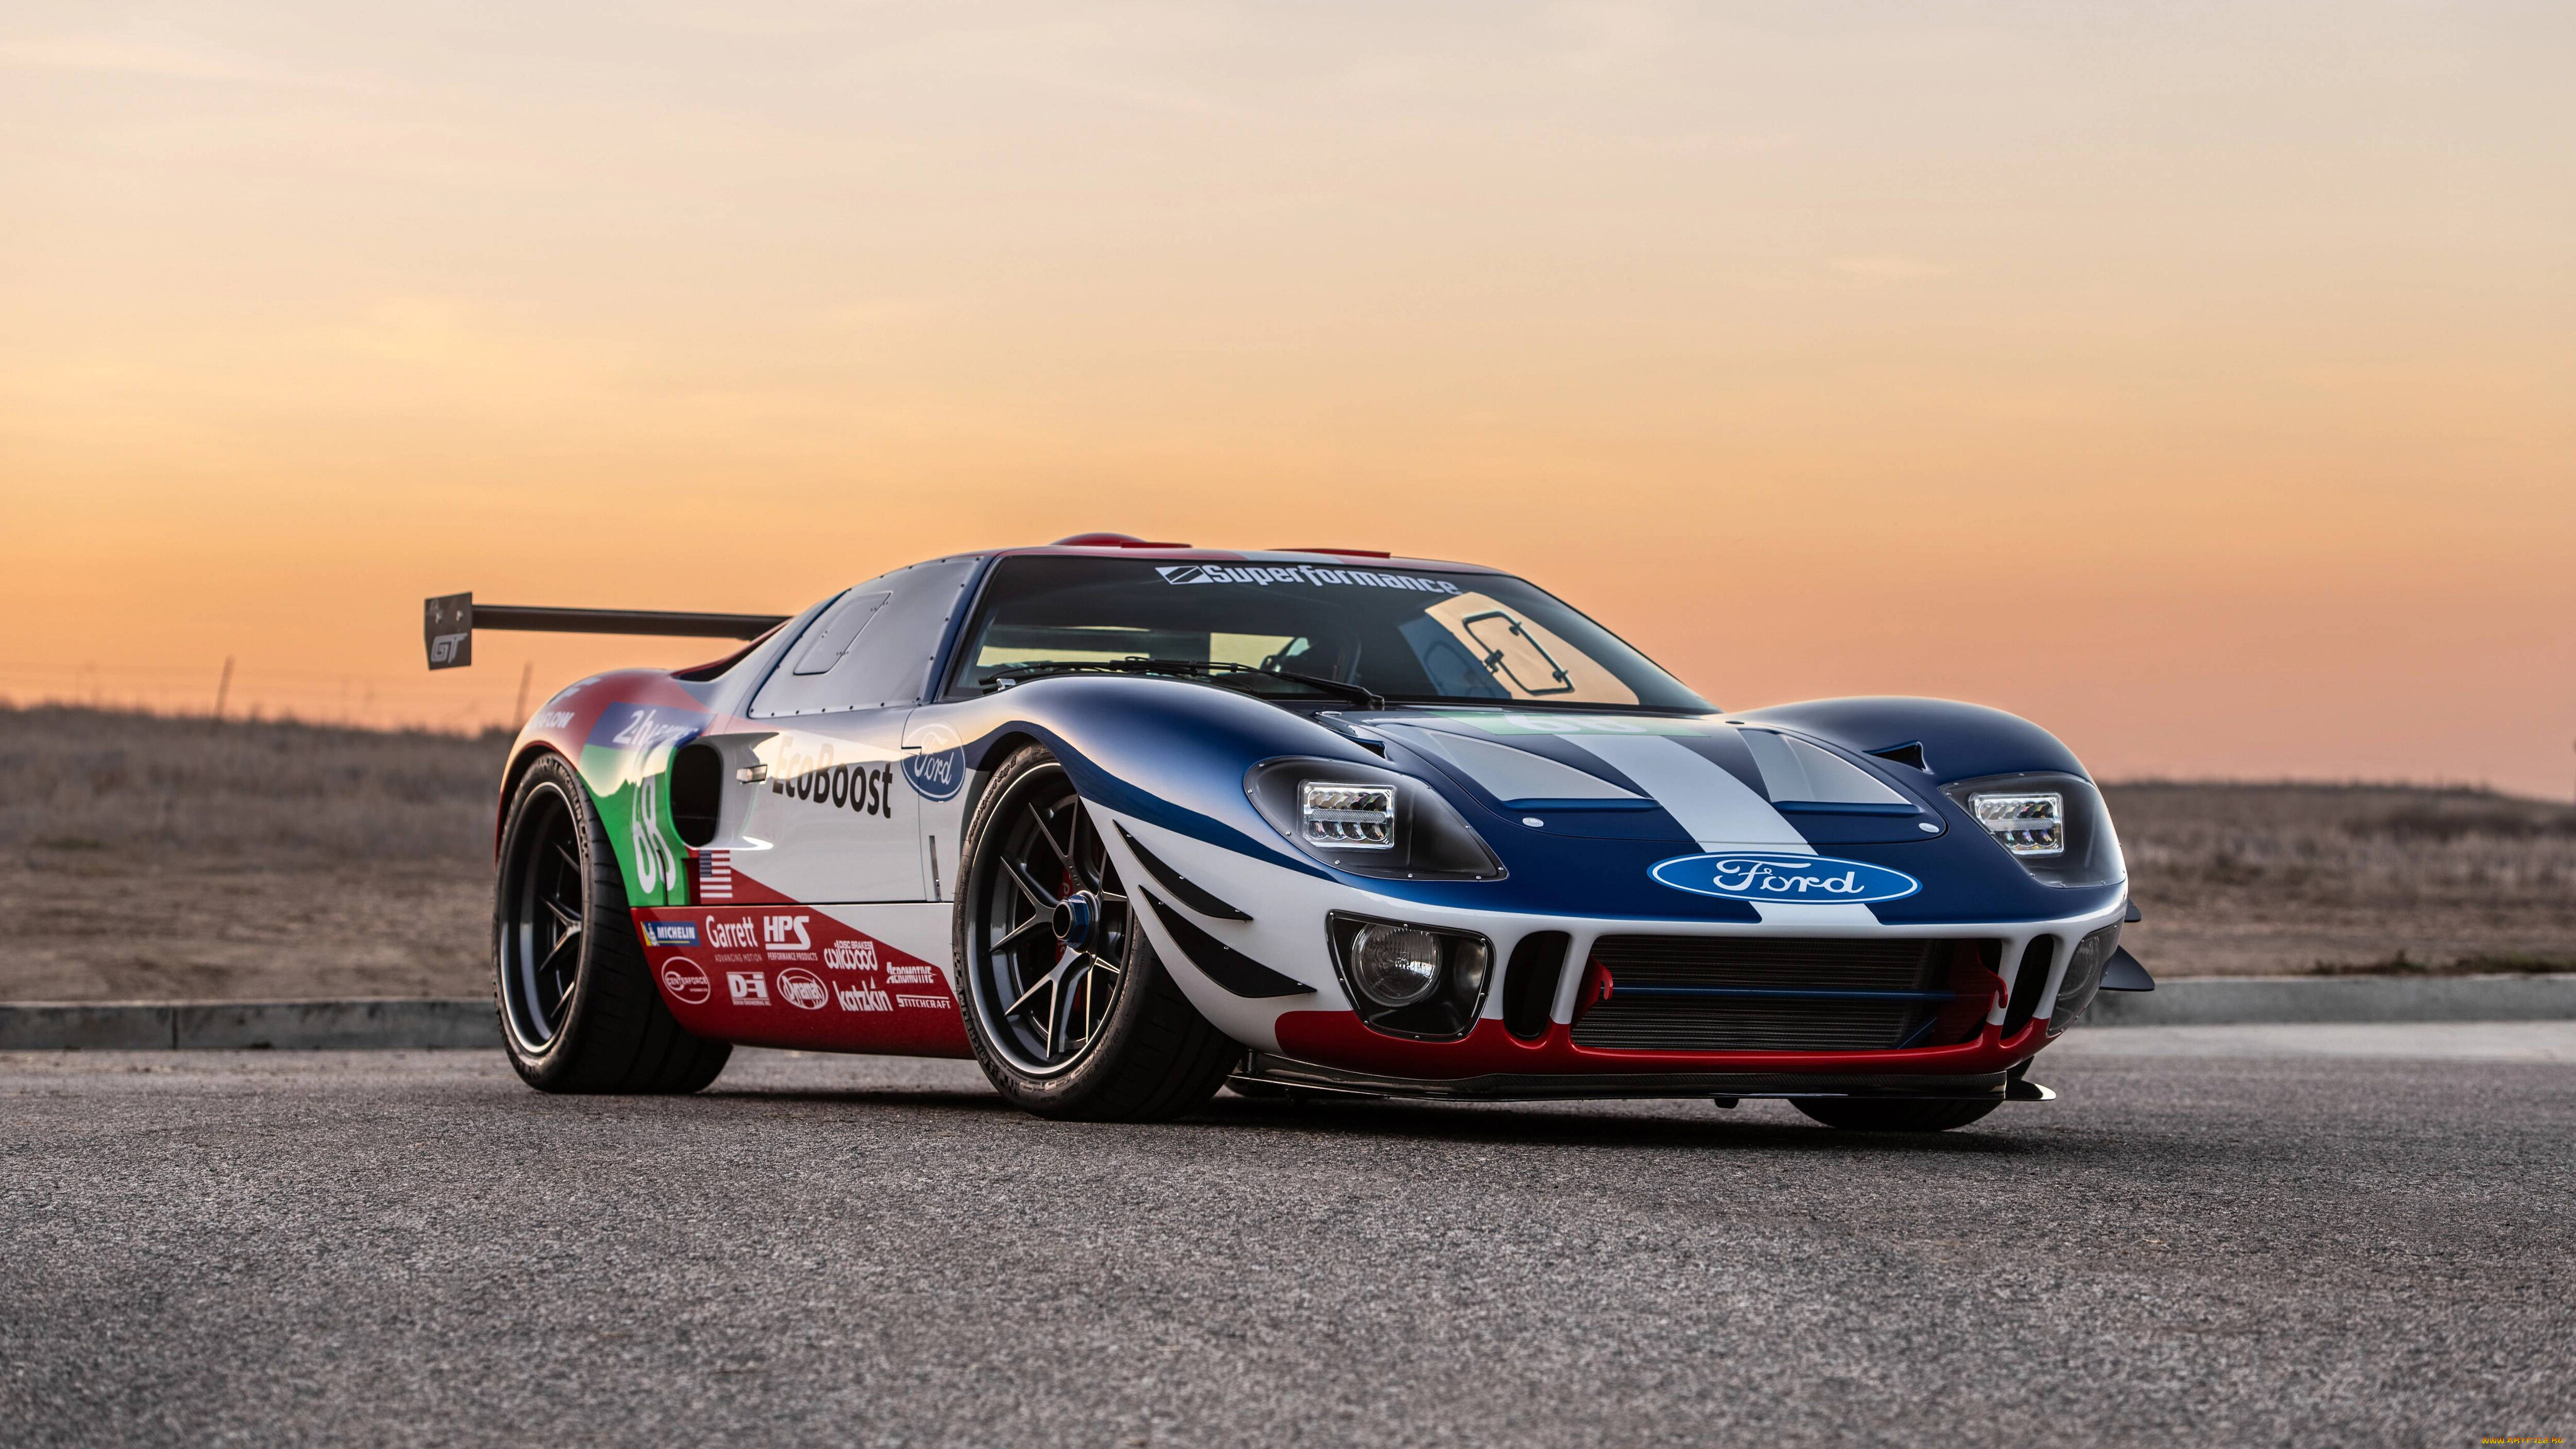 2019 superformance future ford gt40, , ford, , , gt40, superformance, future, 2019